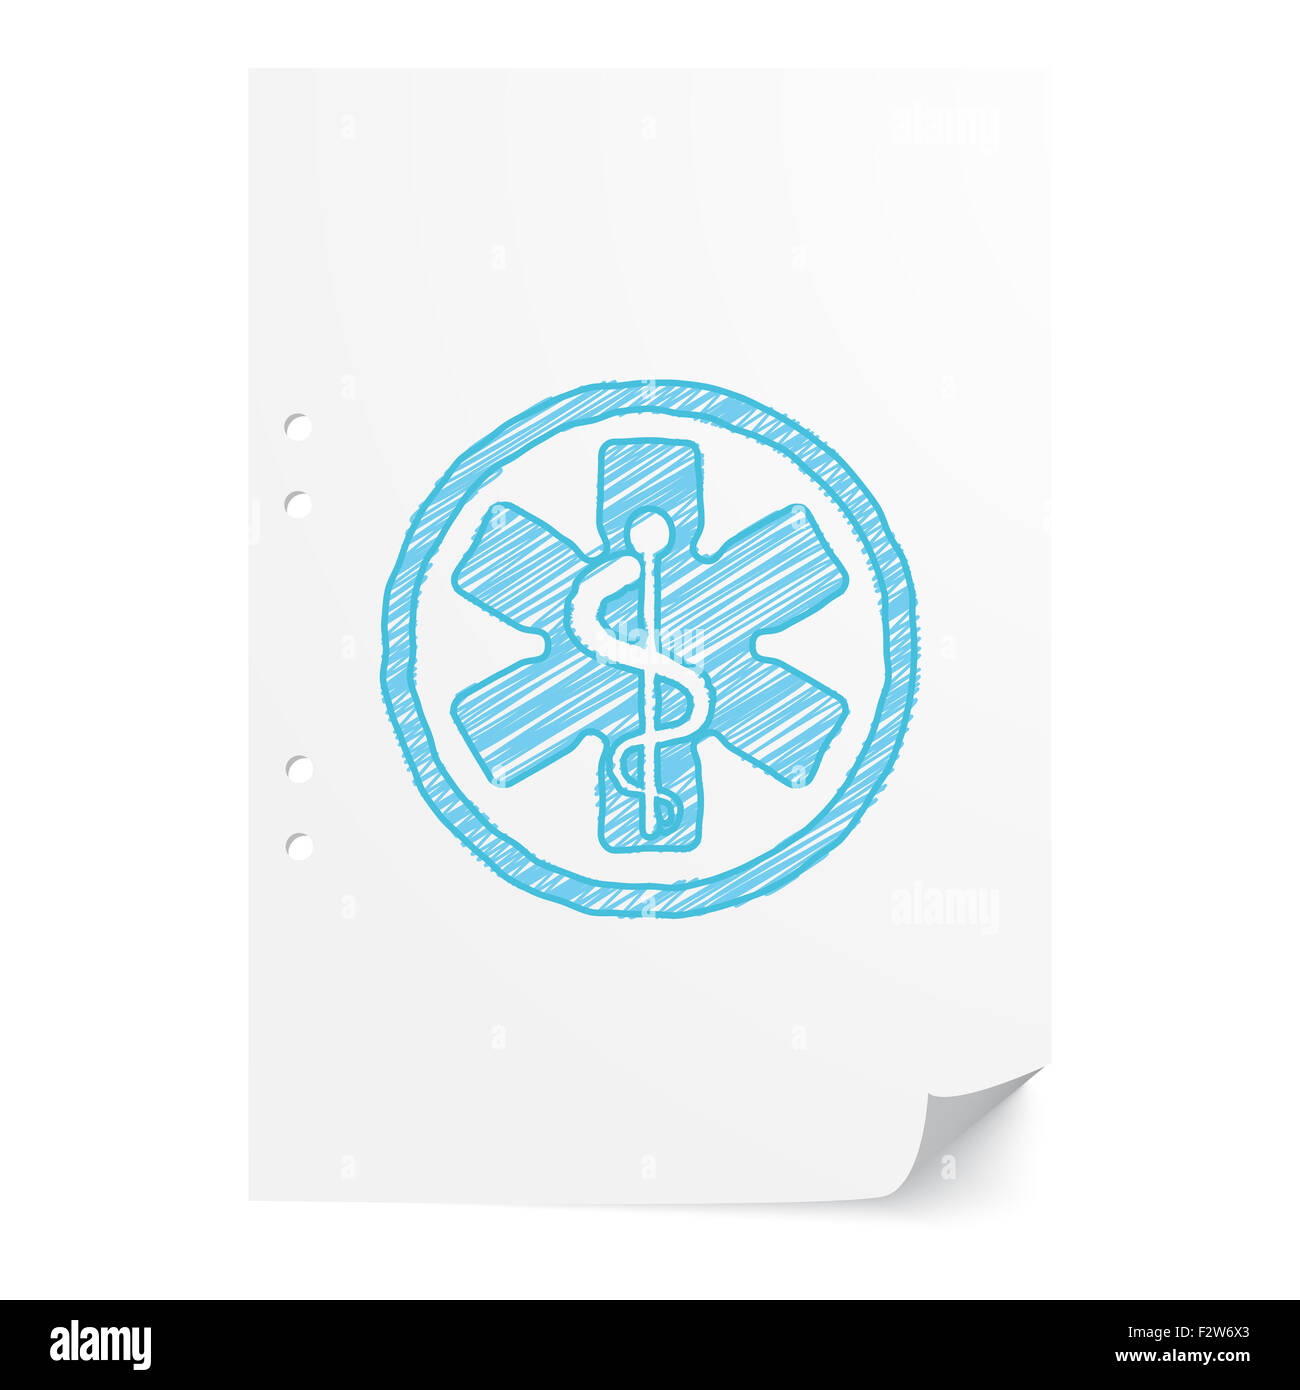 Blue handdrawn Medical Symbol illustration on white paper sheet with copy space Stock Photo